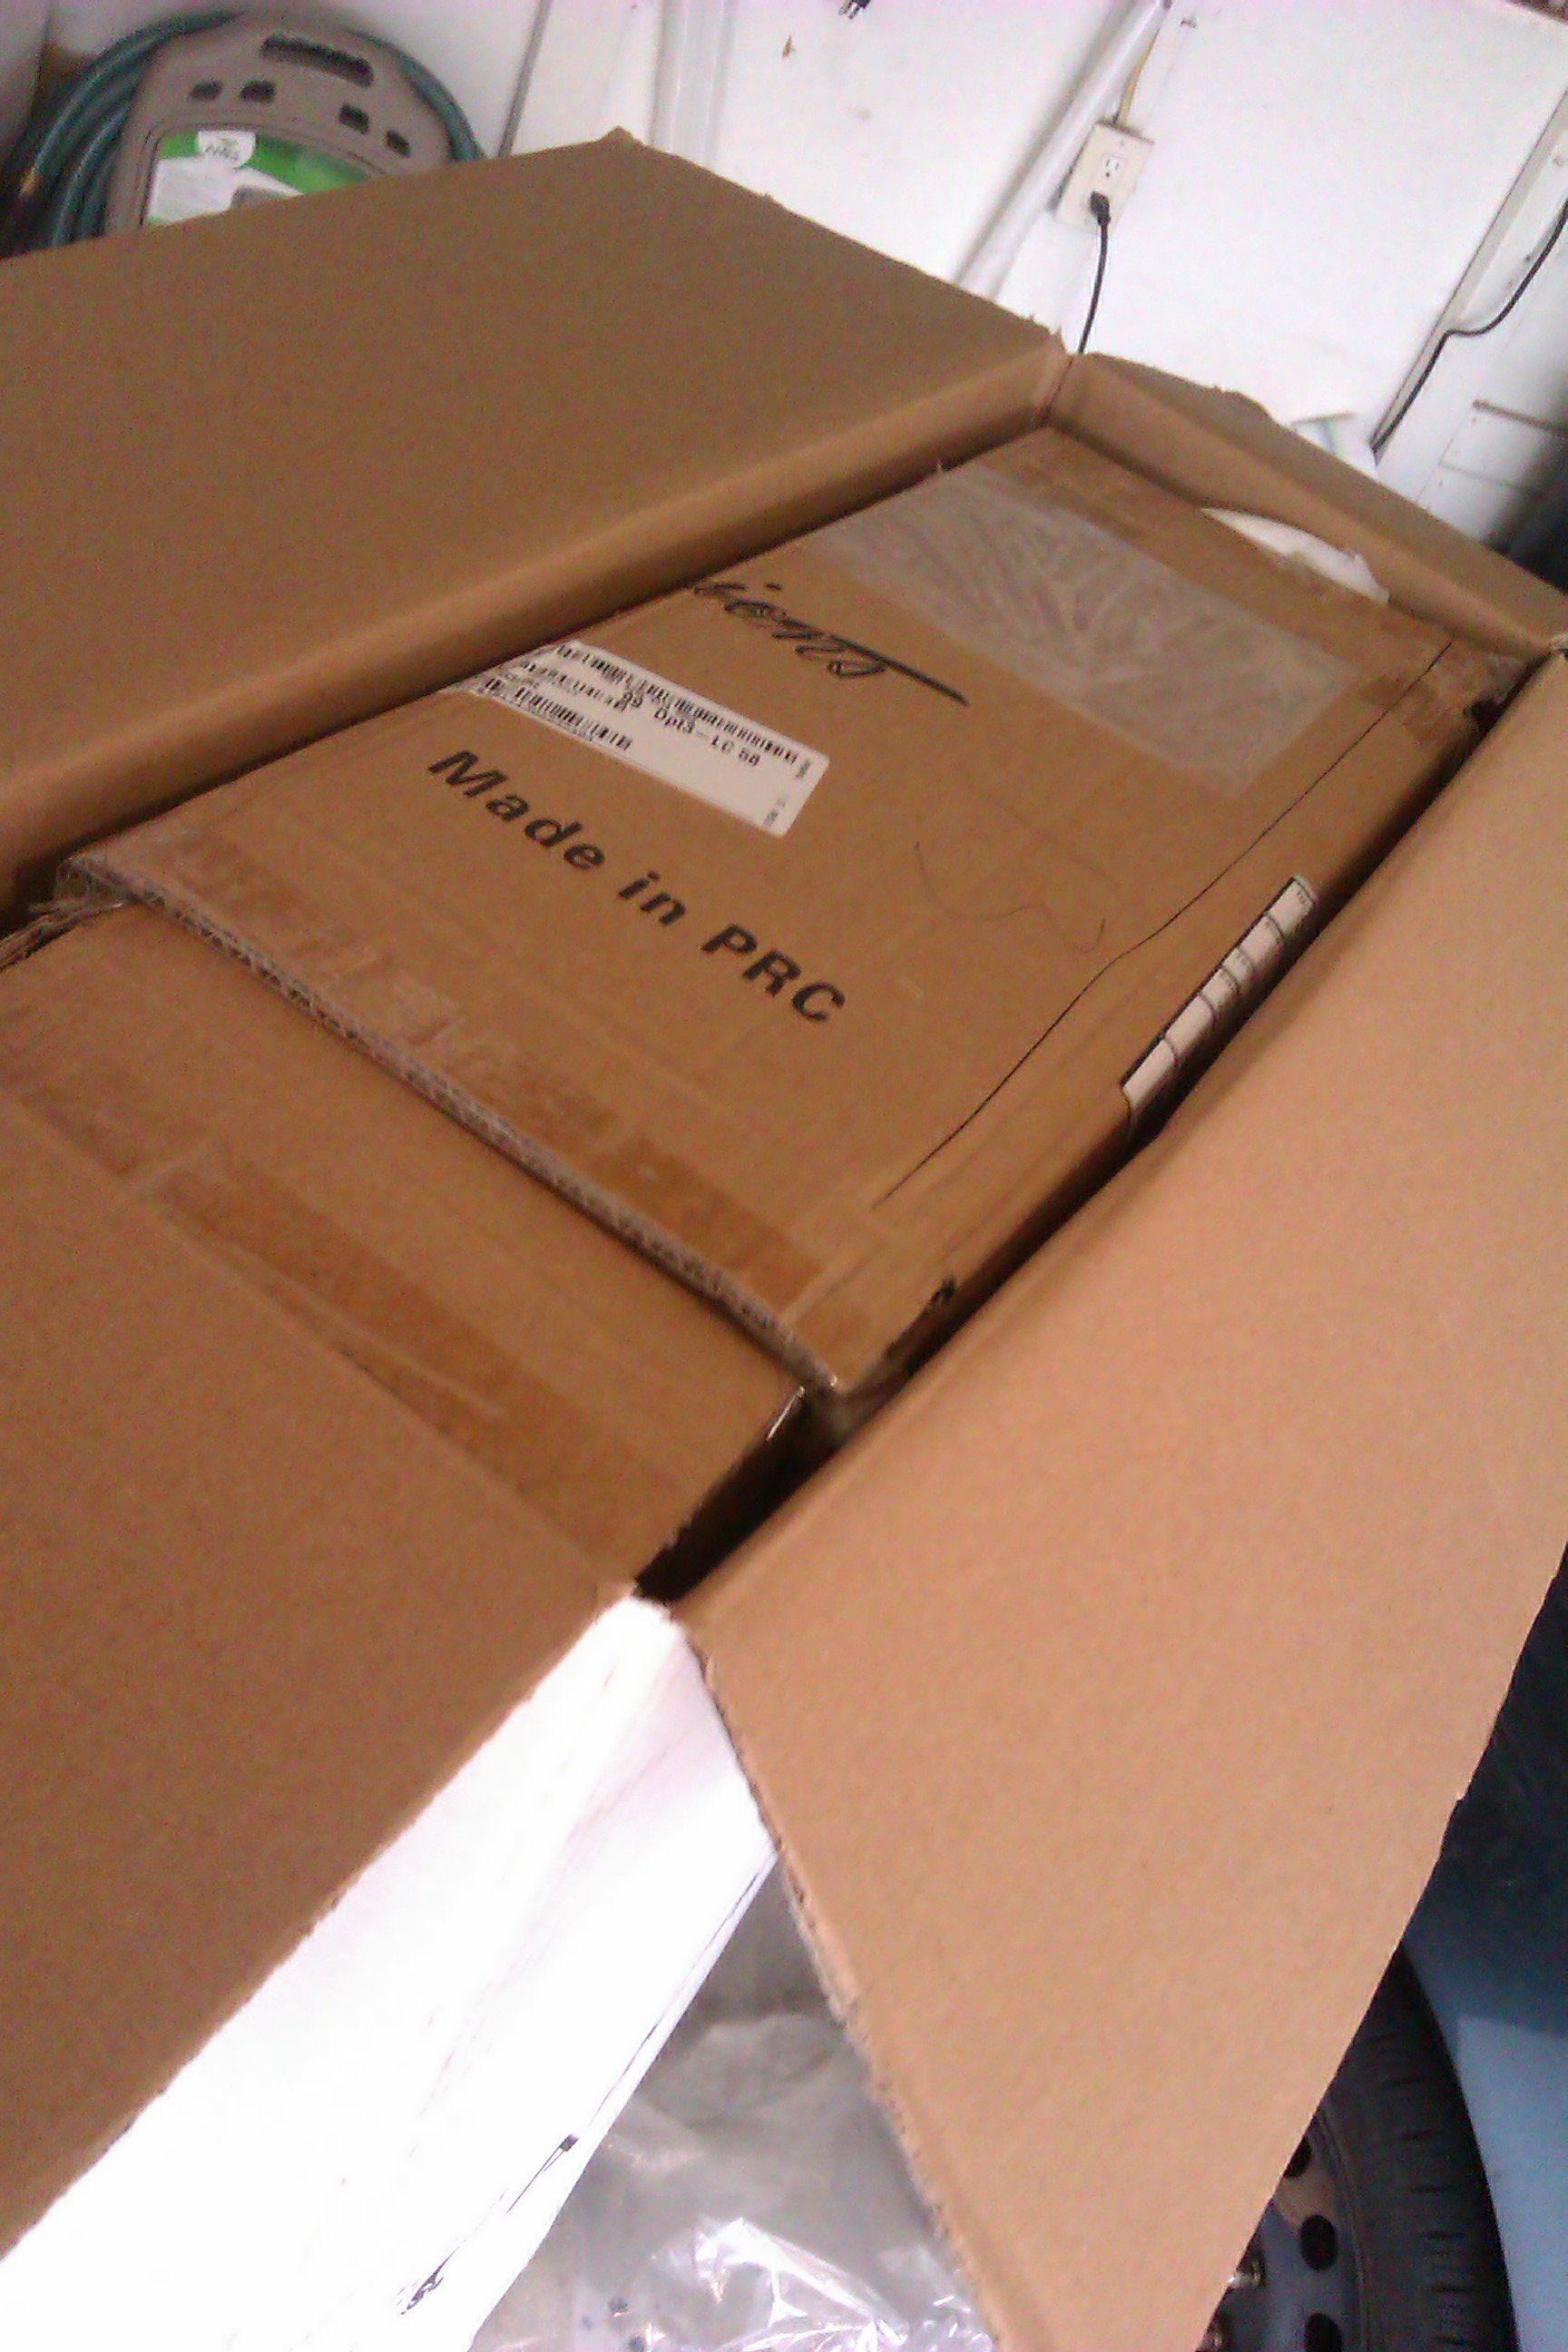 Non-working unit packaged for shipping in a box provided by ArctiCold.